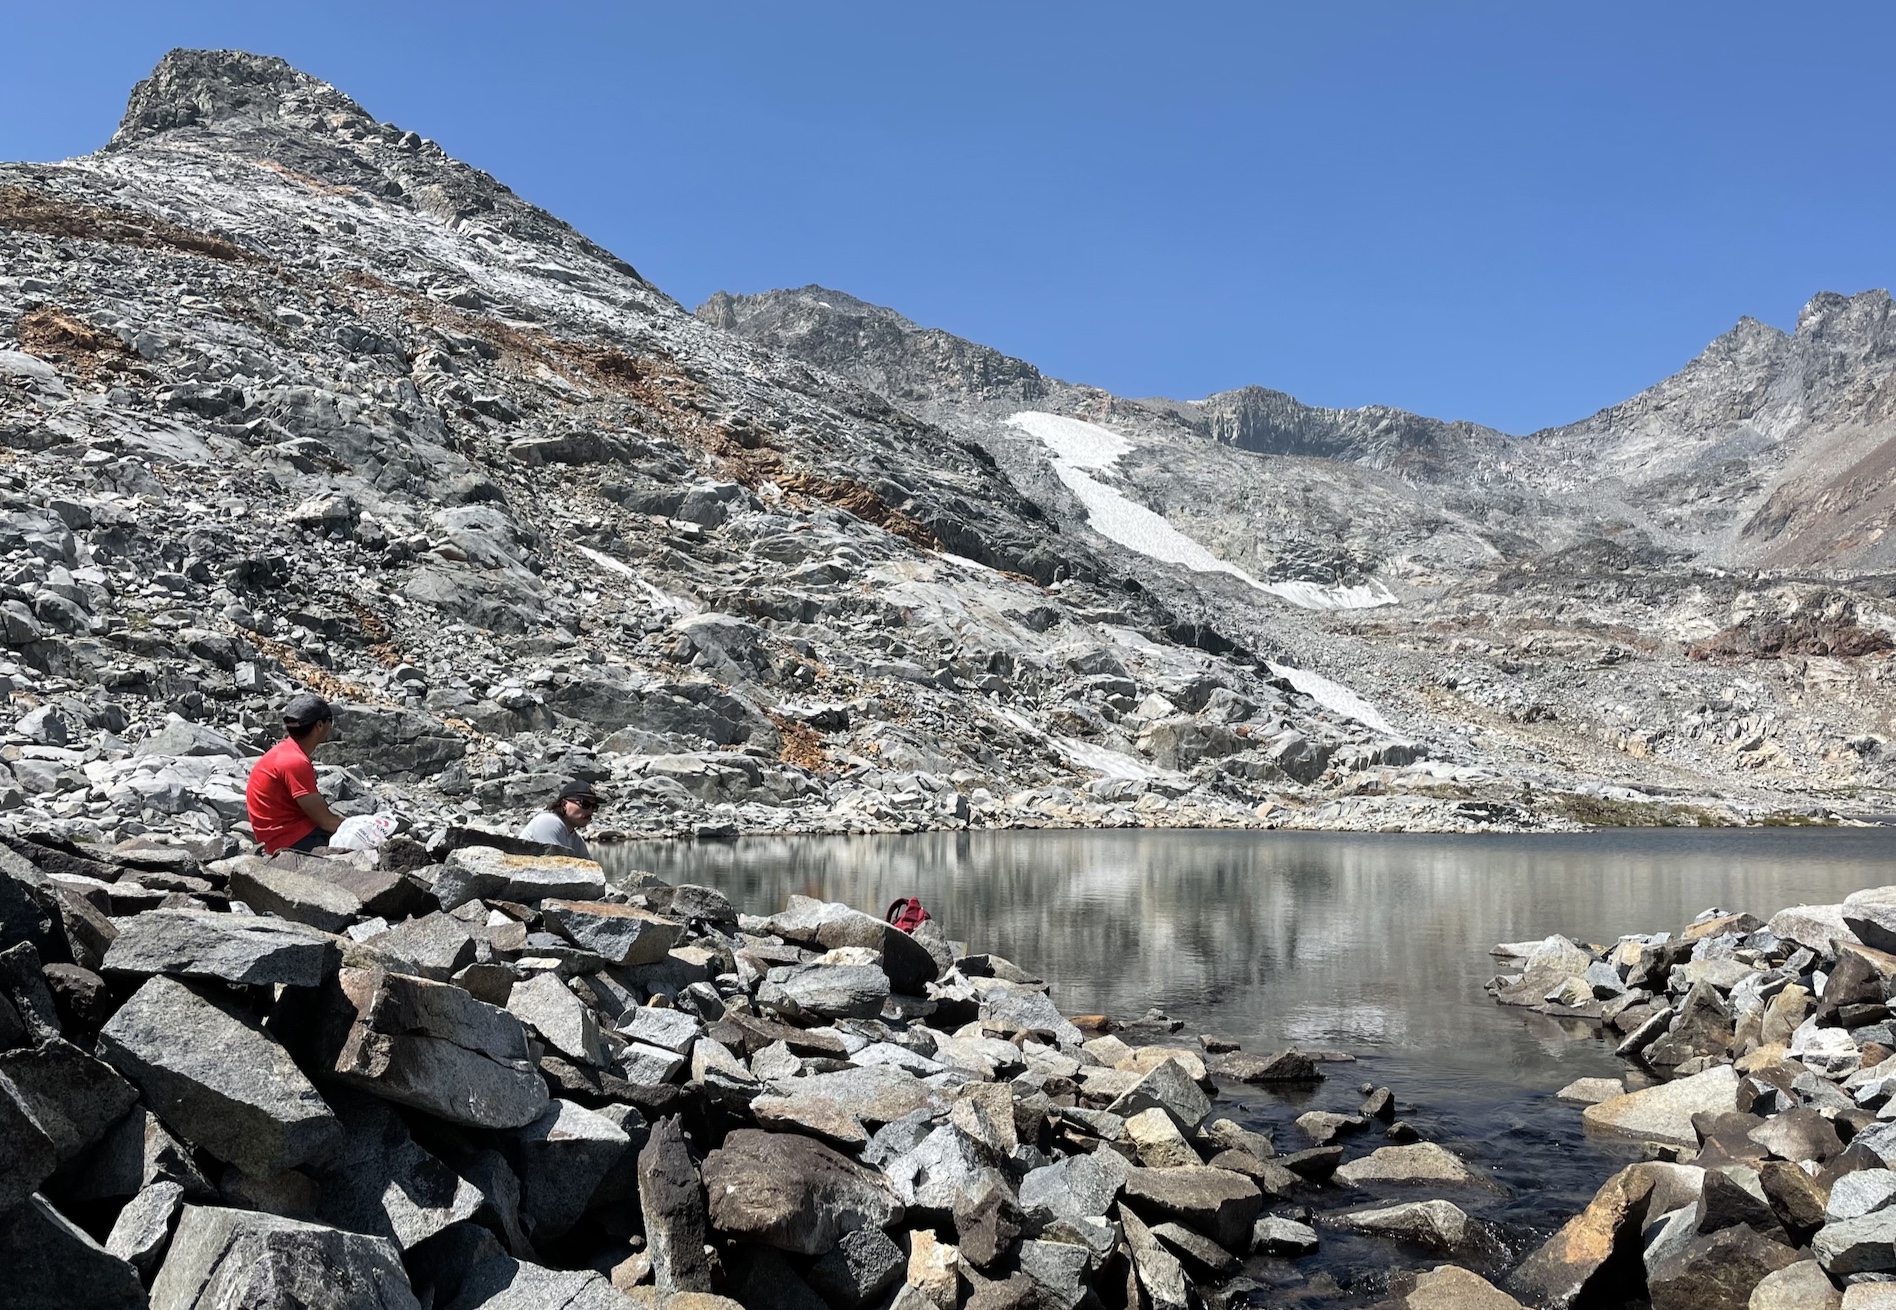 Fetching fresh water and snacking up at upper Marie Lakes